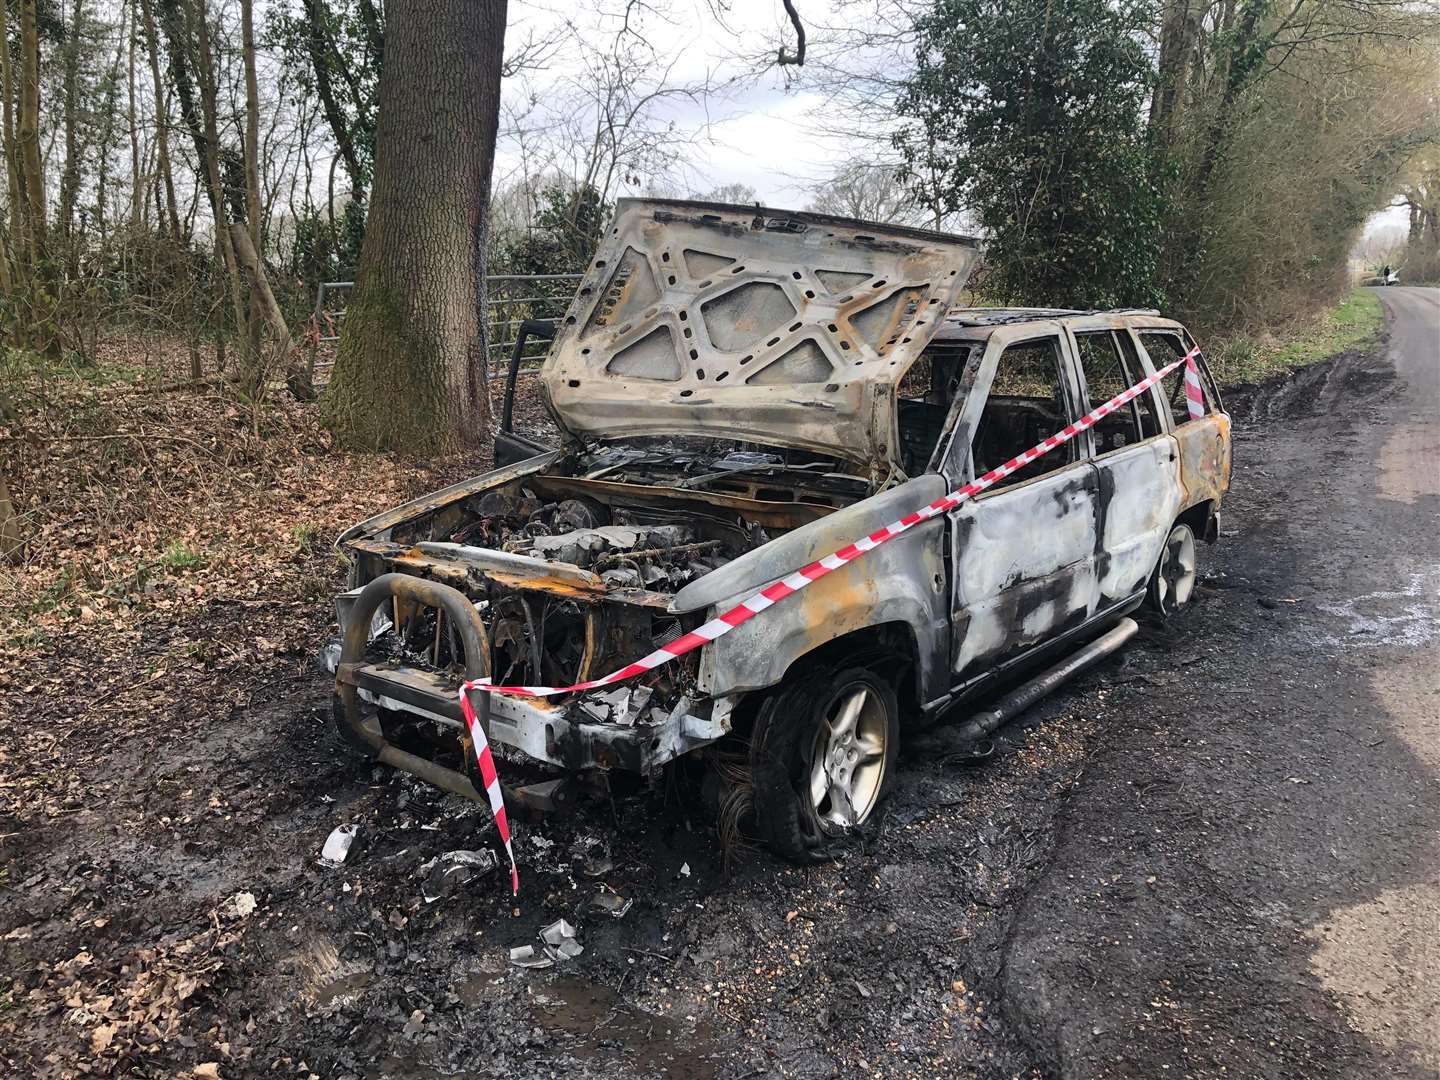 The vehicle used in the ram raid, which was torched soon after in Harbourne Lane